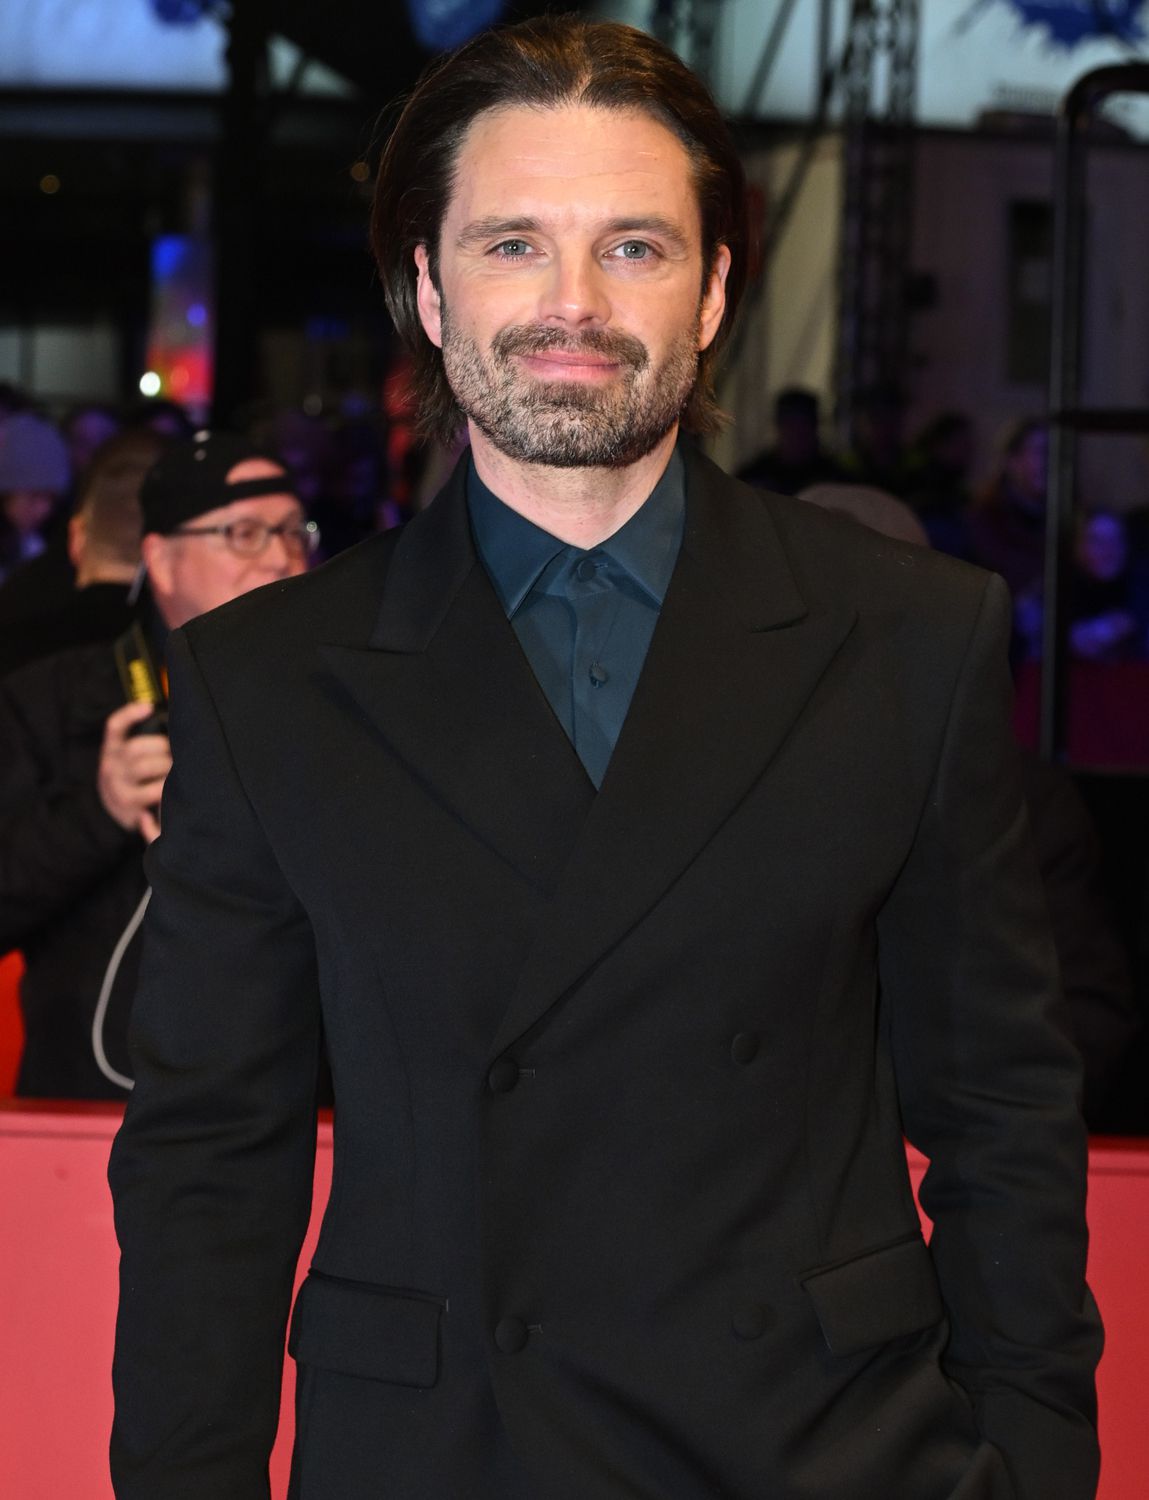 Sebastian Stan attends the "A Different Man" premiere during the 74th Berlinale International Film Festival 